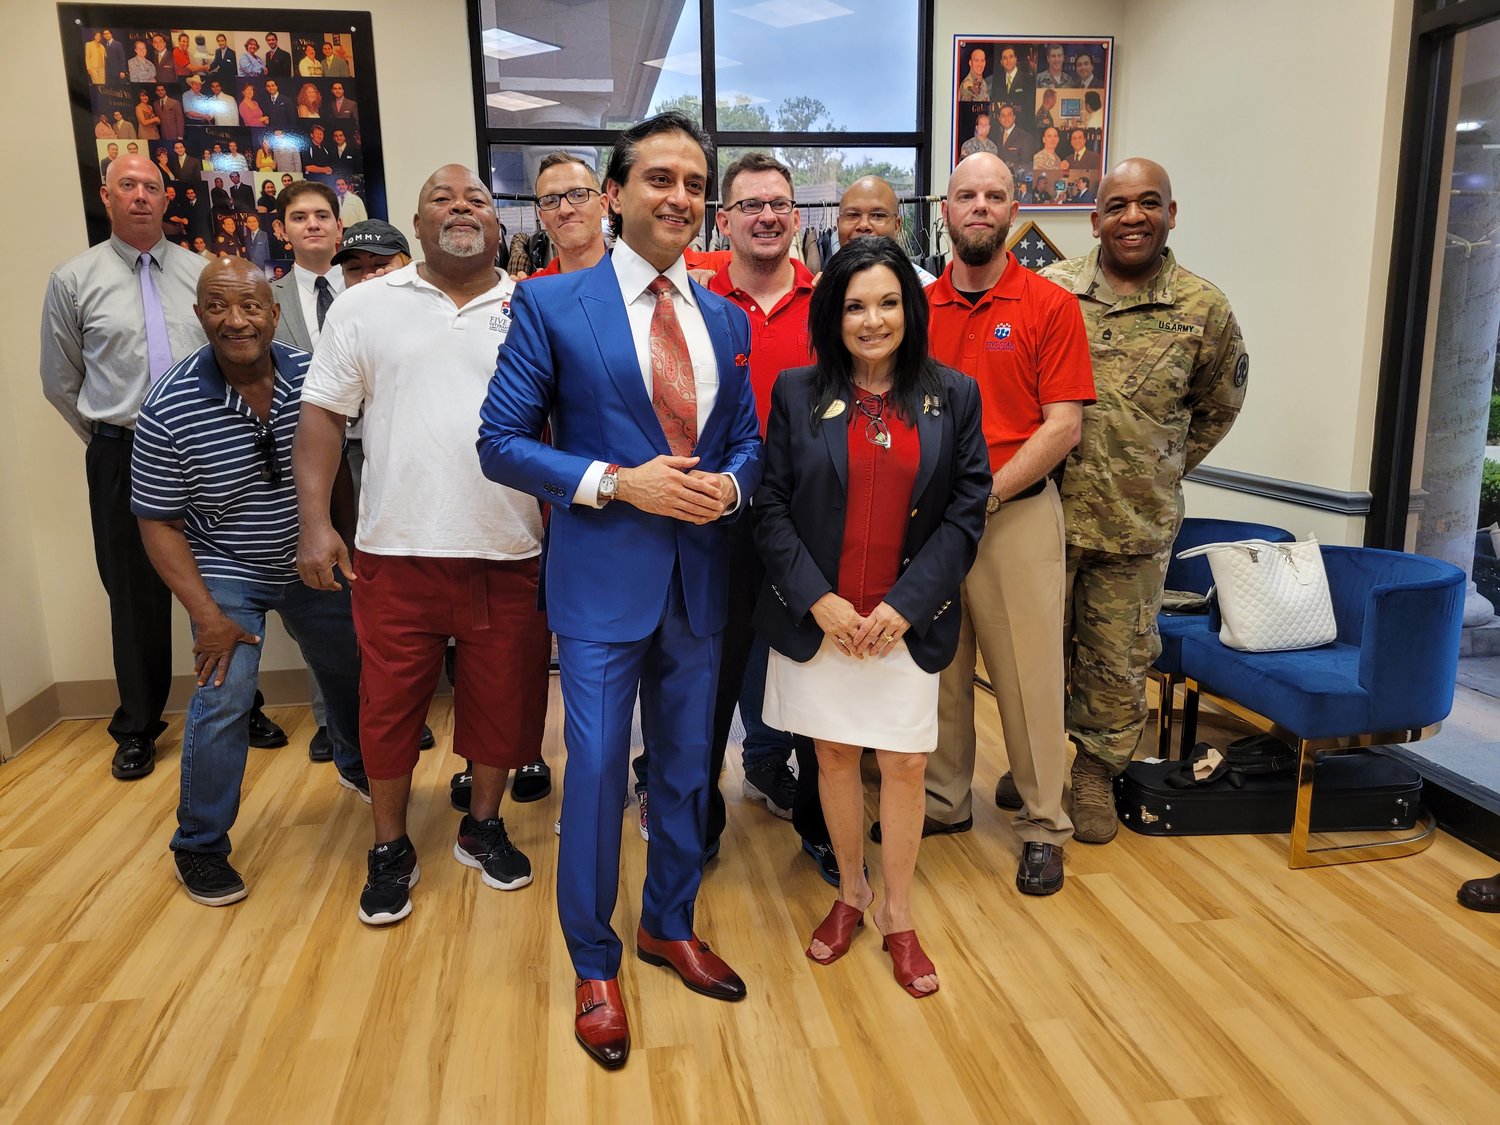 The Cultural Center at Ponte Vedra Beach in partnership with the Gulani Vision Institute donated suits to local U.S. veteran organizations, individuals and artists reentering the workforce. Here, Cultural Center President and Executive Director Donna Guzzo and Dr. Arun Gulani stand with U.S. veterans receiving suits.